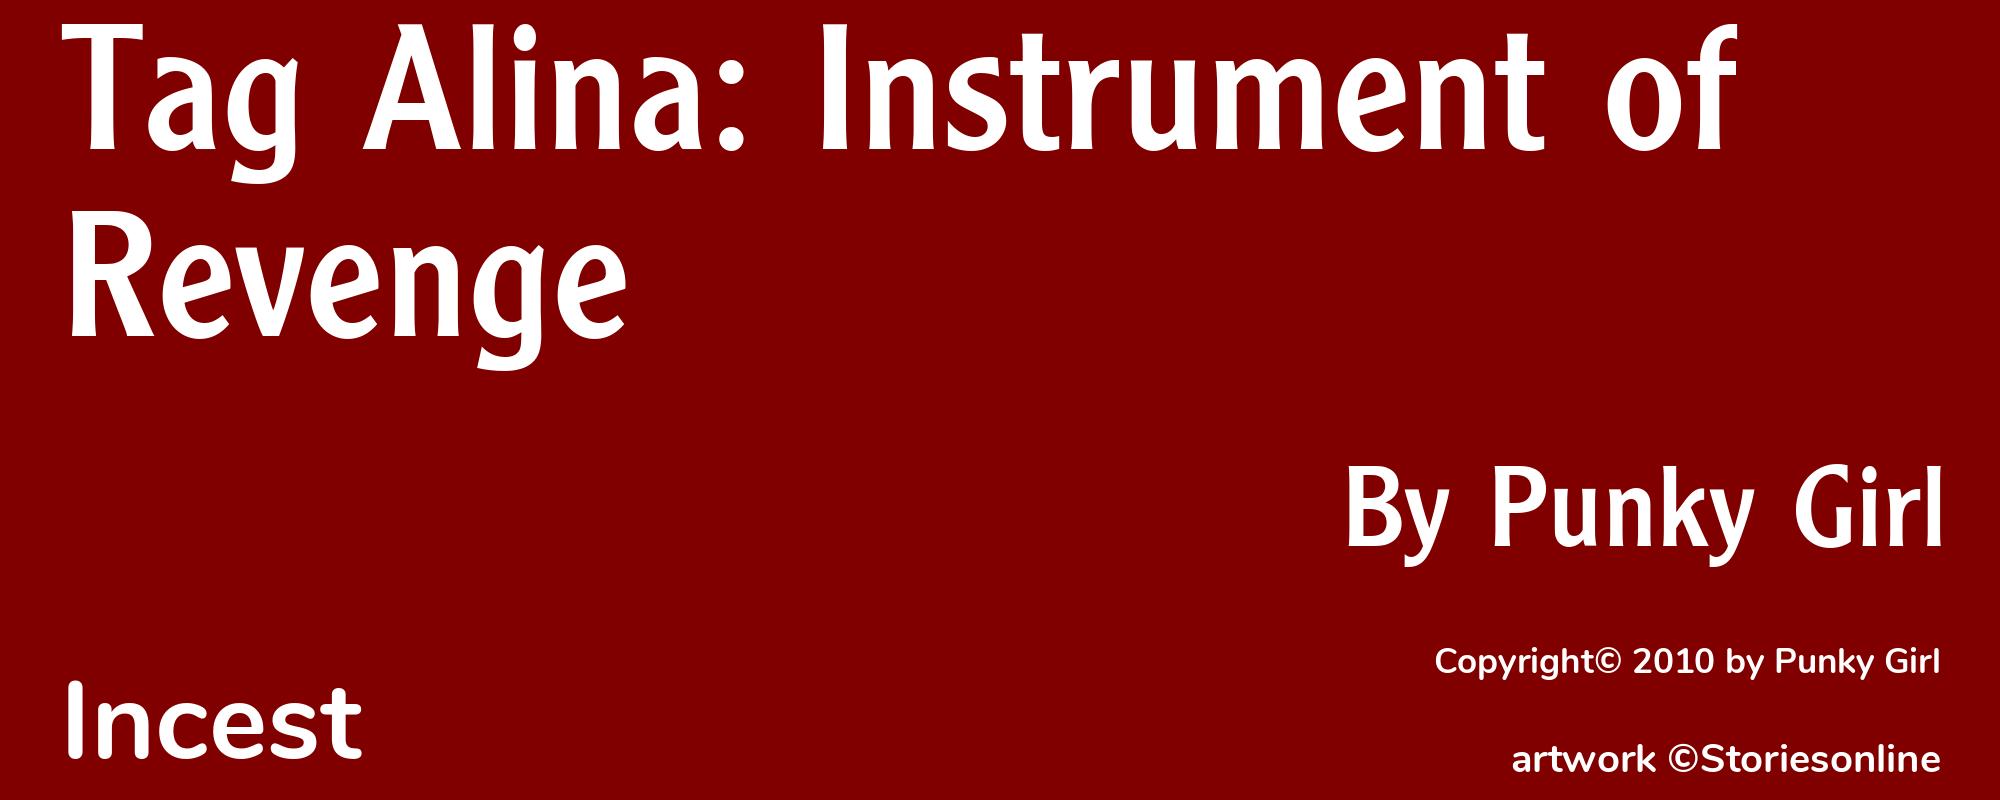 Tag Alina: Instrument of Revenge - Cover